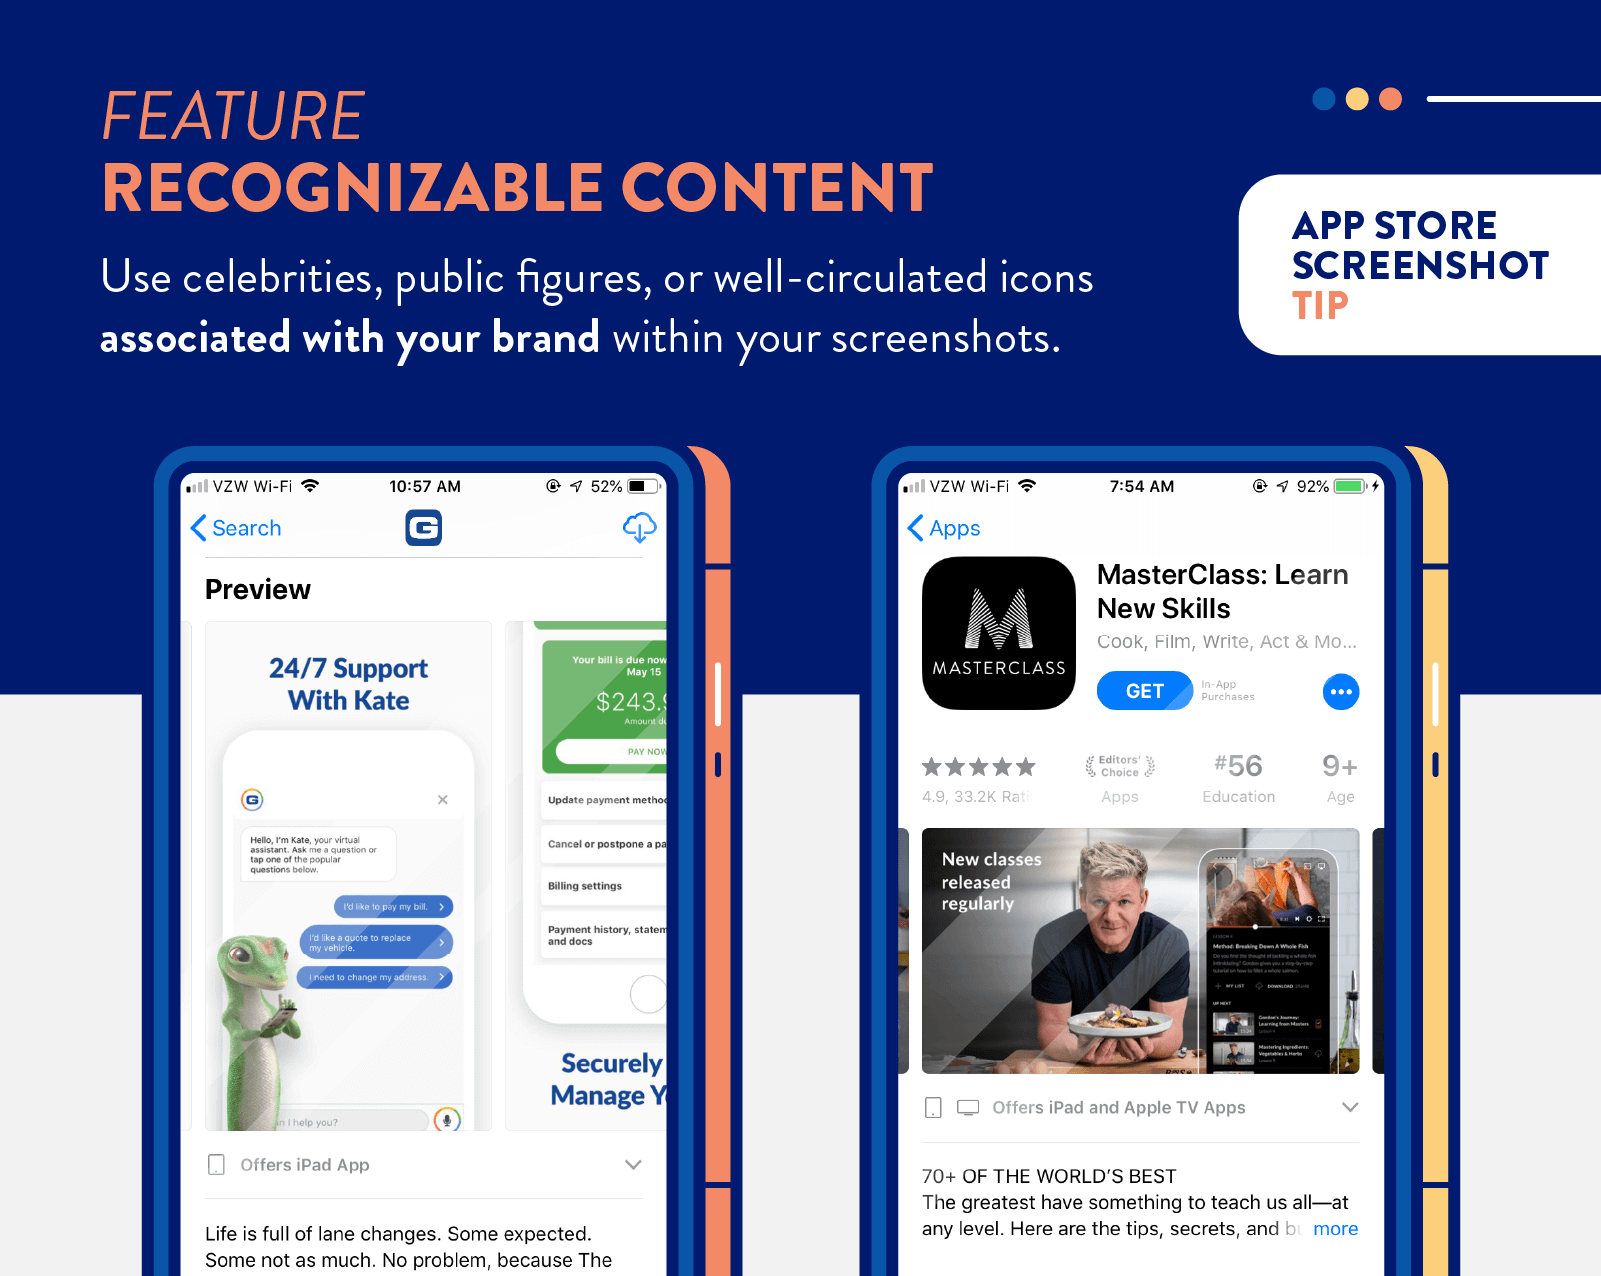 app store screenshots tip to feature recognizable content and celebrities